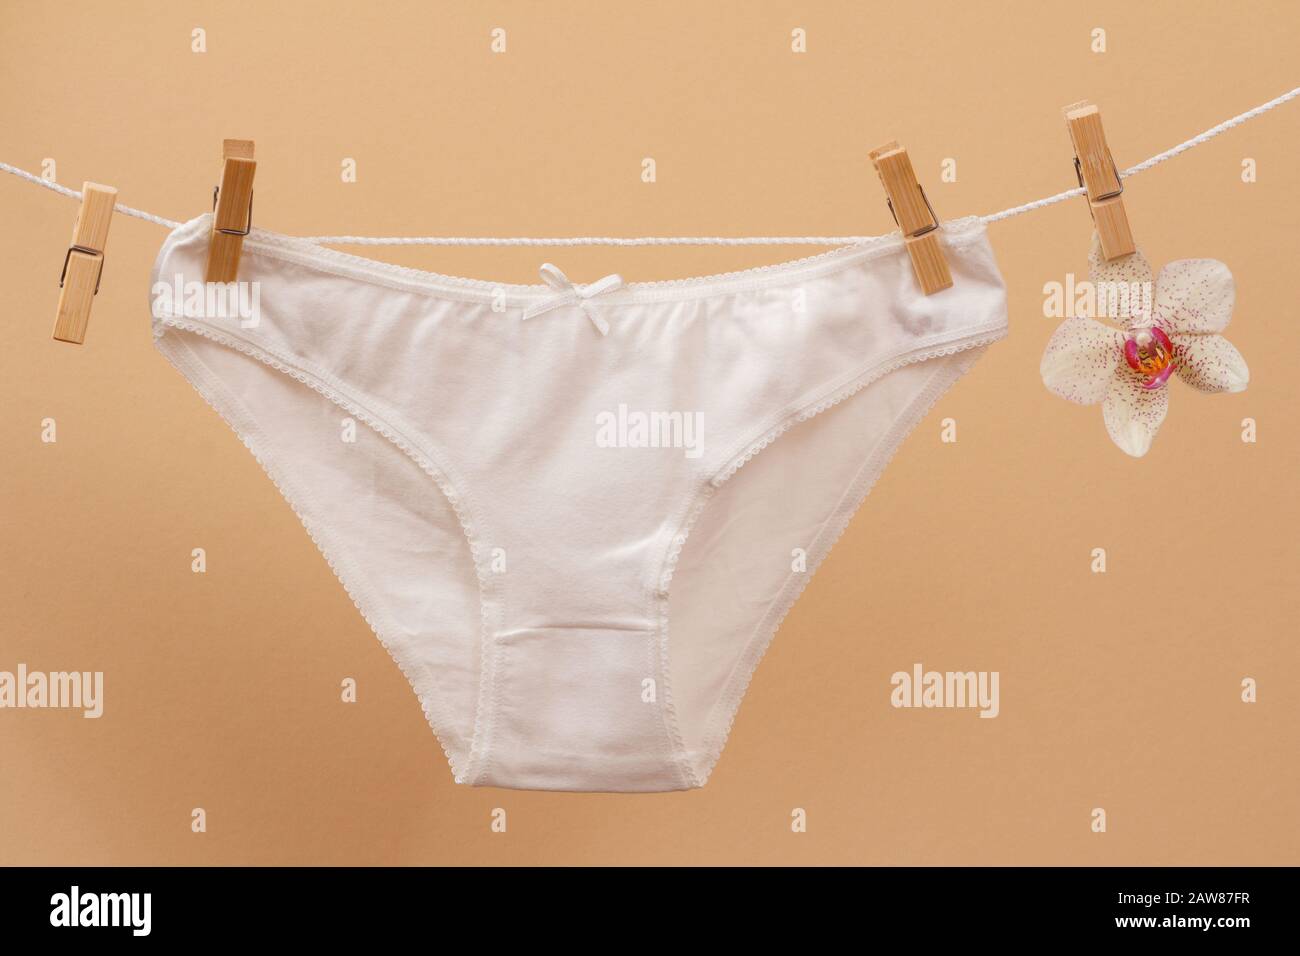 New white cotton panties on clothesline with clothespins and orchid flower in beige background. Woman underwear. Stock Photo